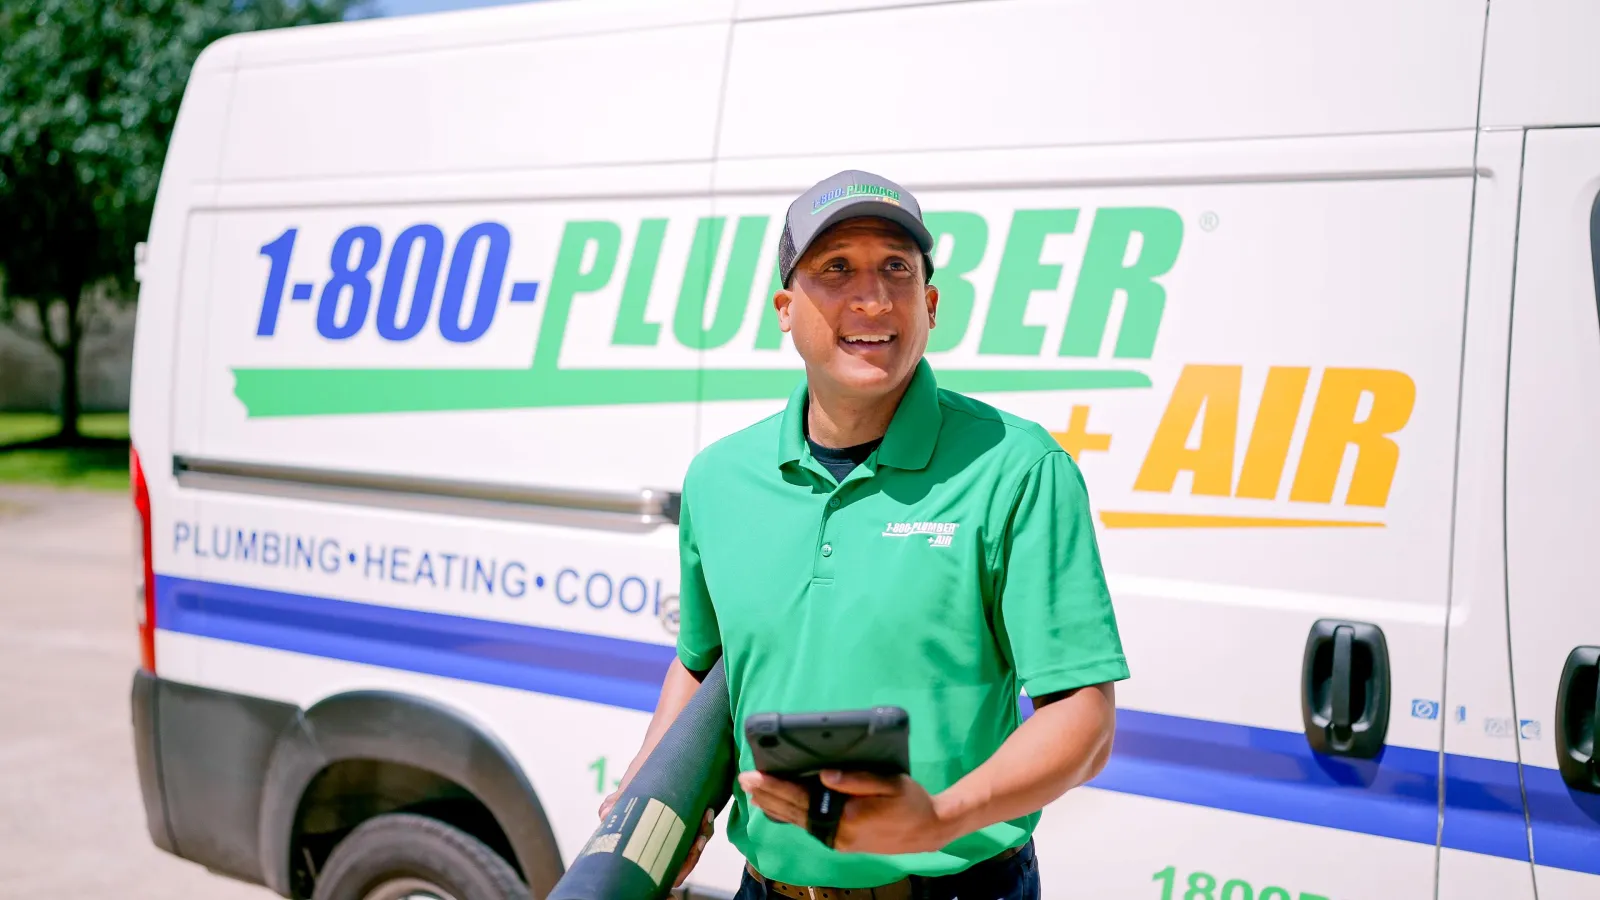 A 1-800-Plumber +Air of Pearland heating technician and a van